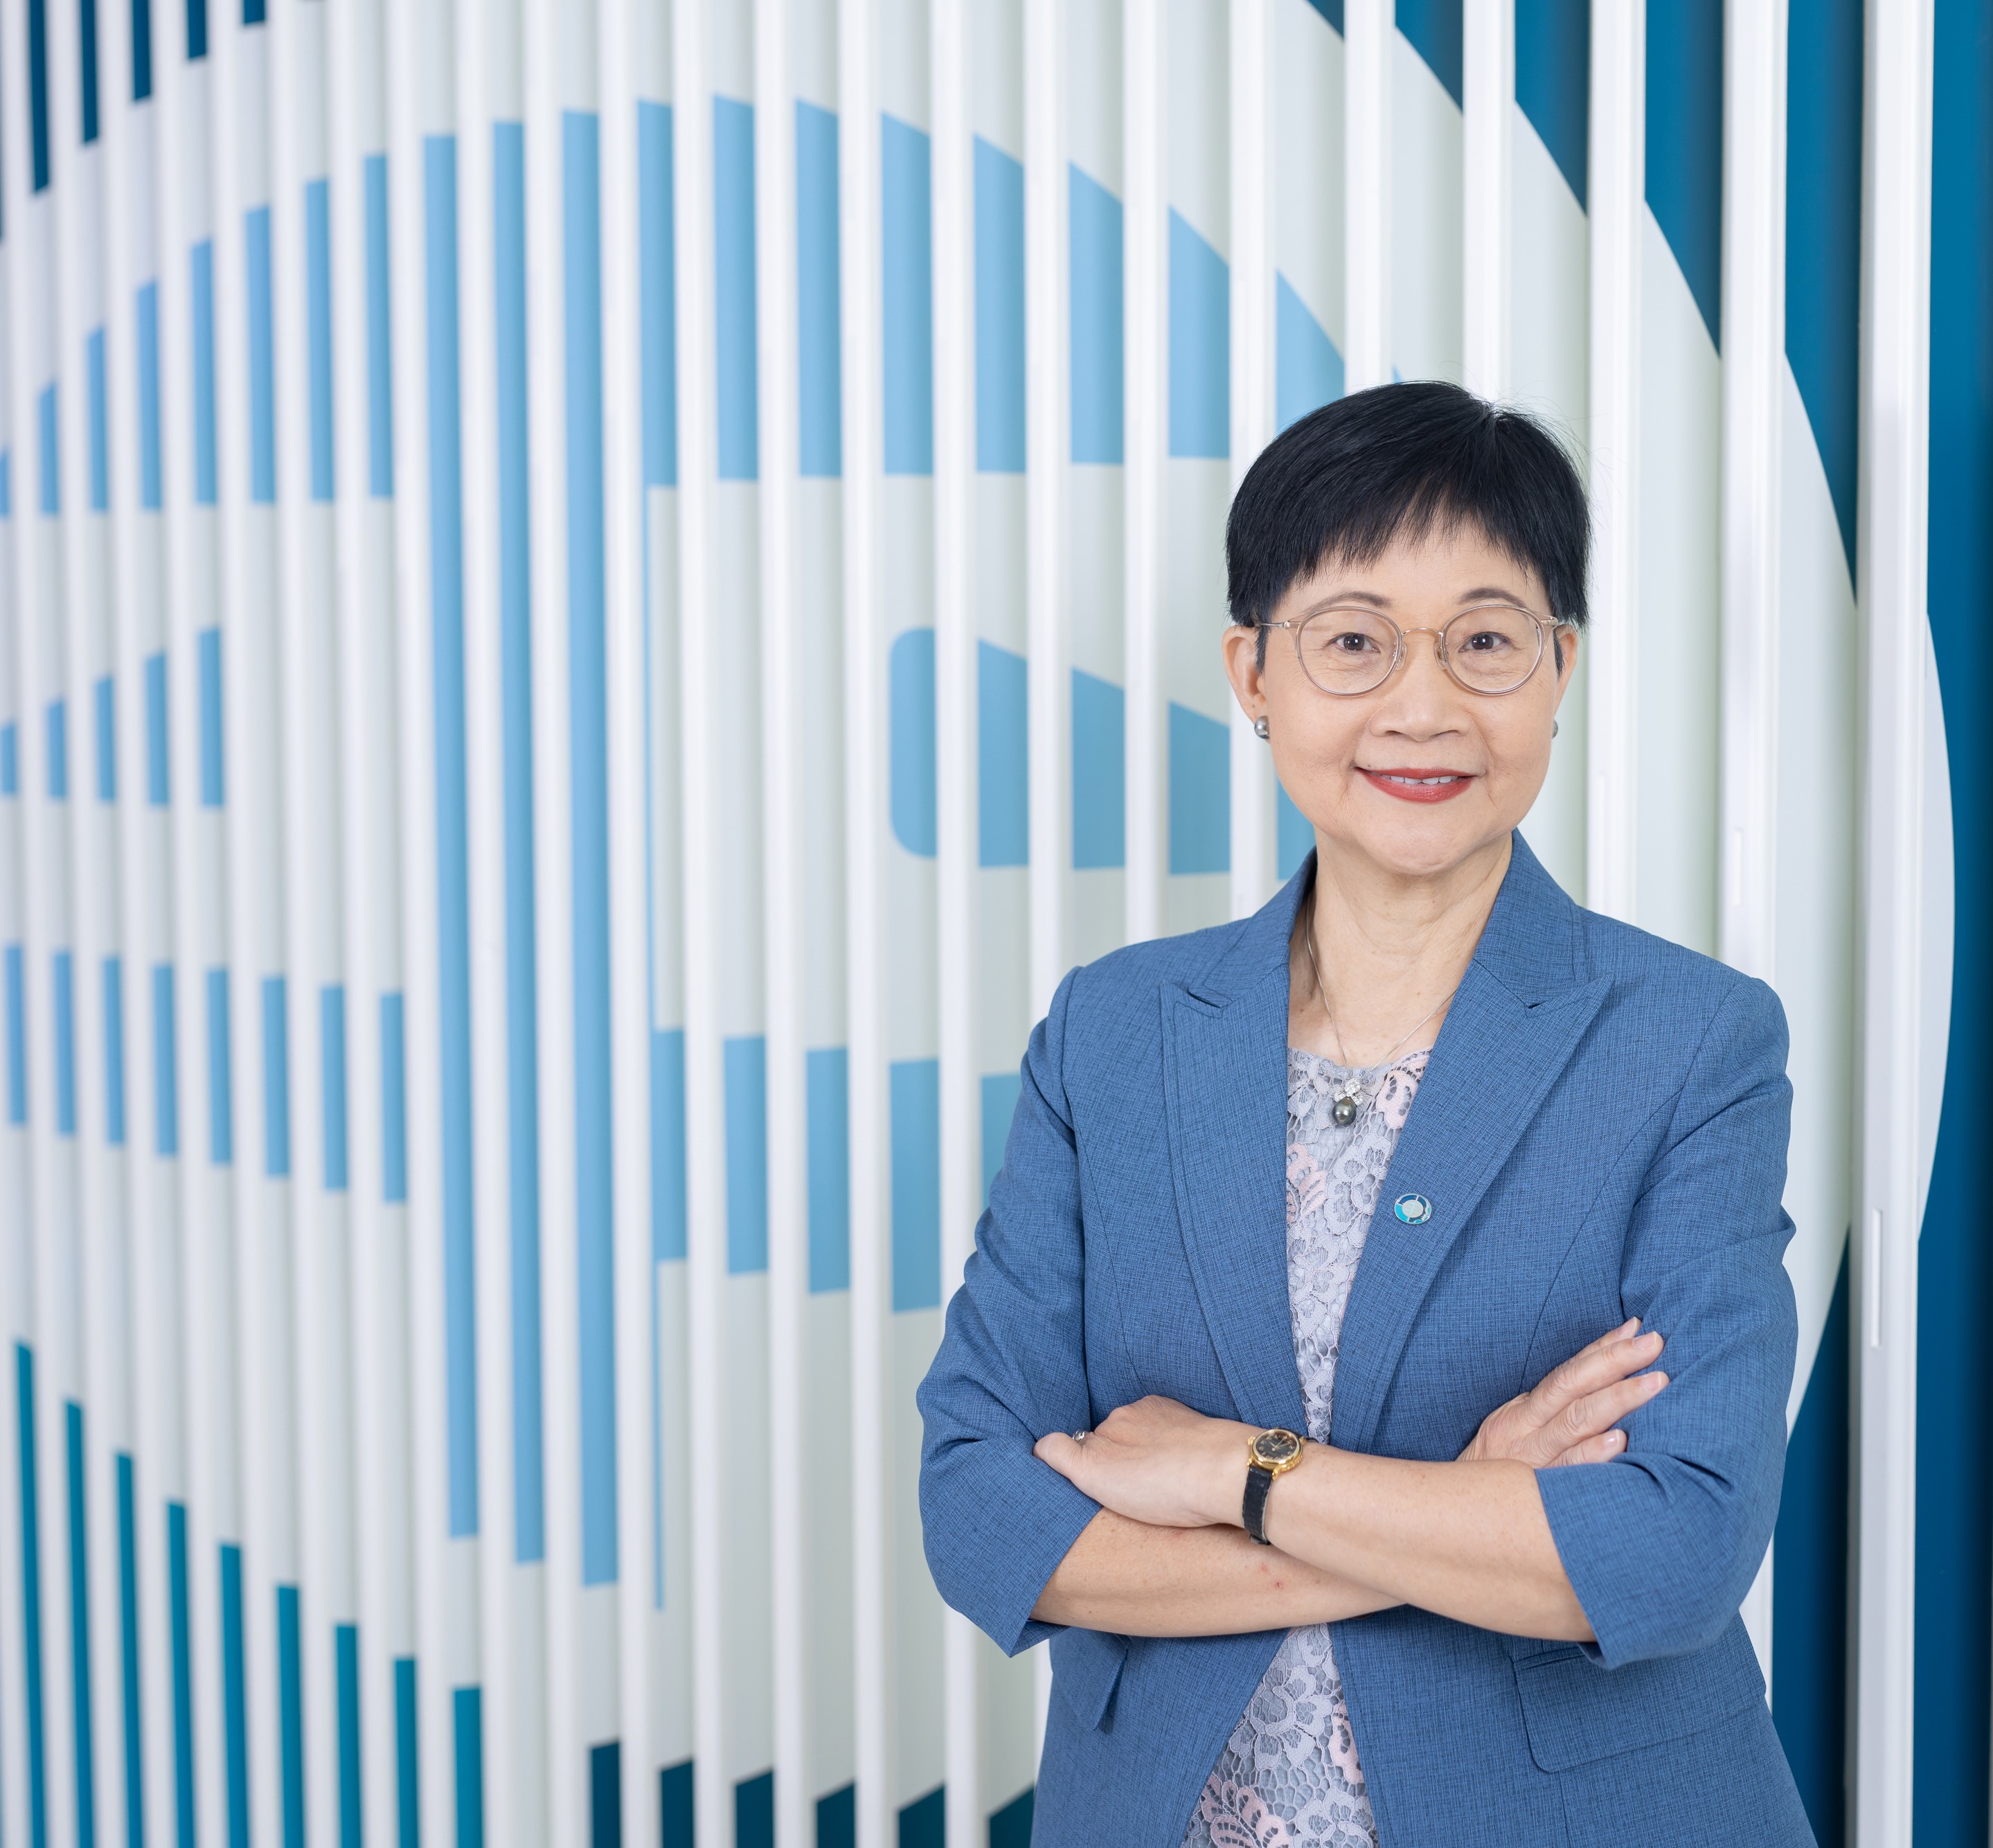 Ms Linda LAM Mei-sau assumes office as EOC Chairperson